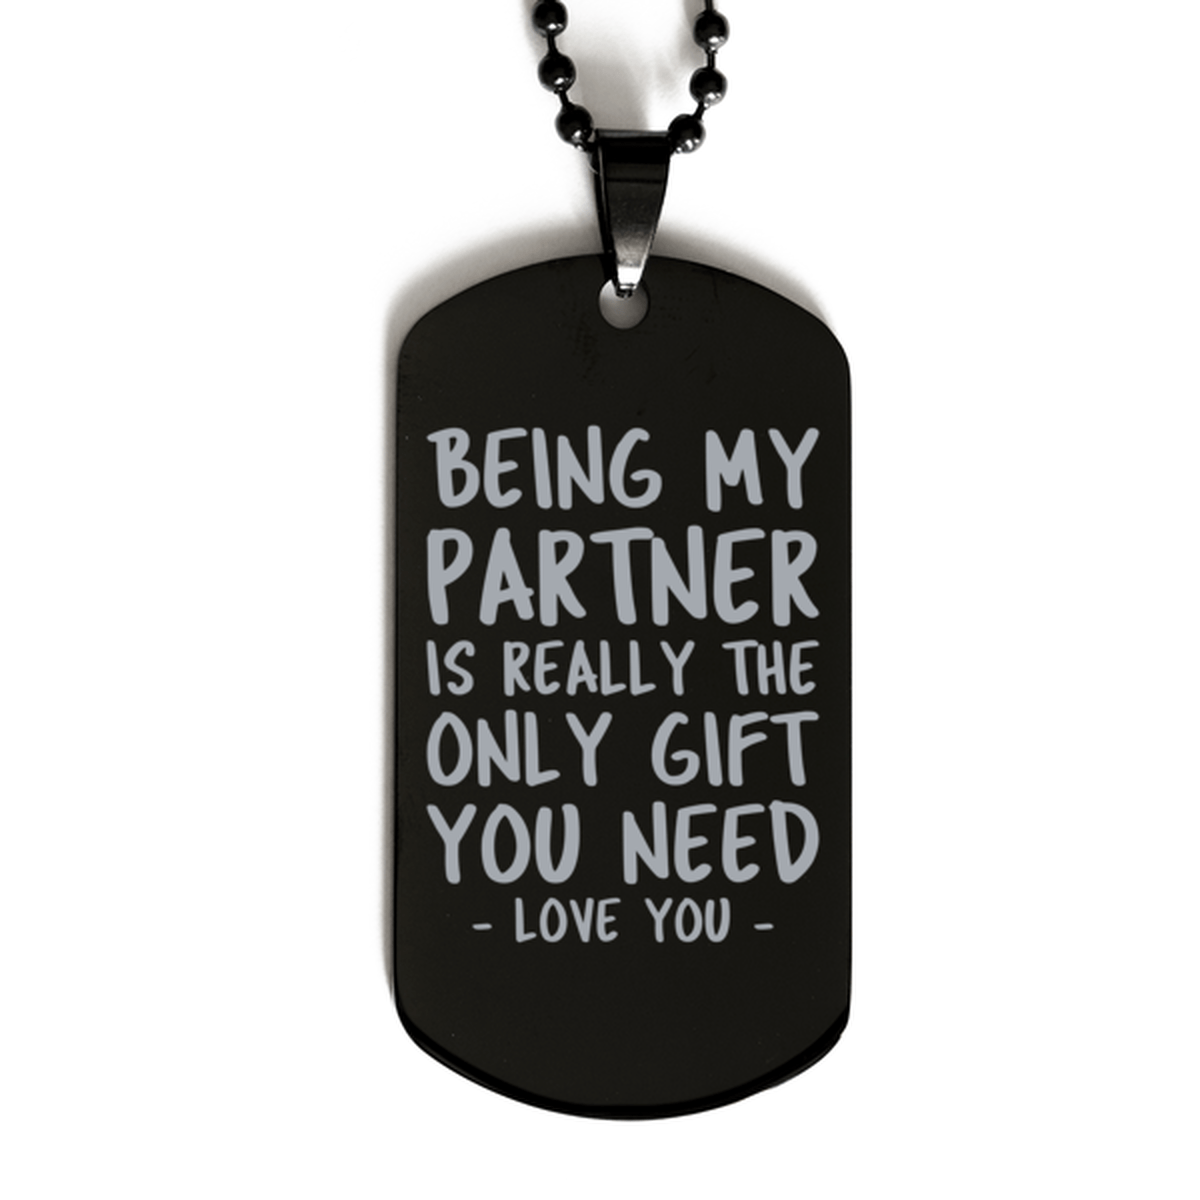 Funny Partner Black Dog Tag Necklace, Being My Partner Is Really the Only Gift You Need, Best Birthday Gifts for Partner